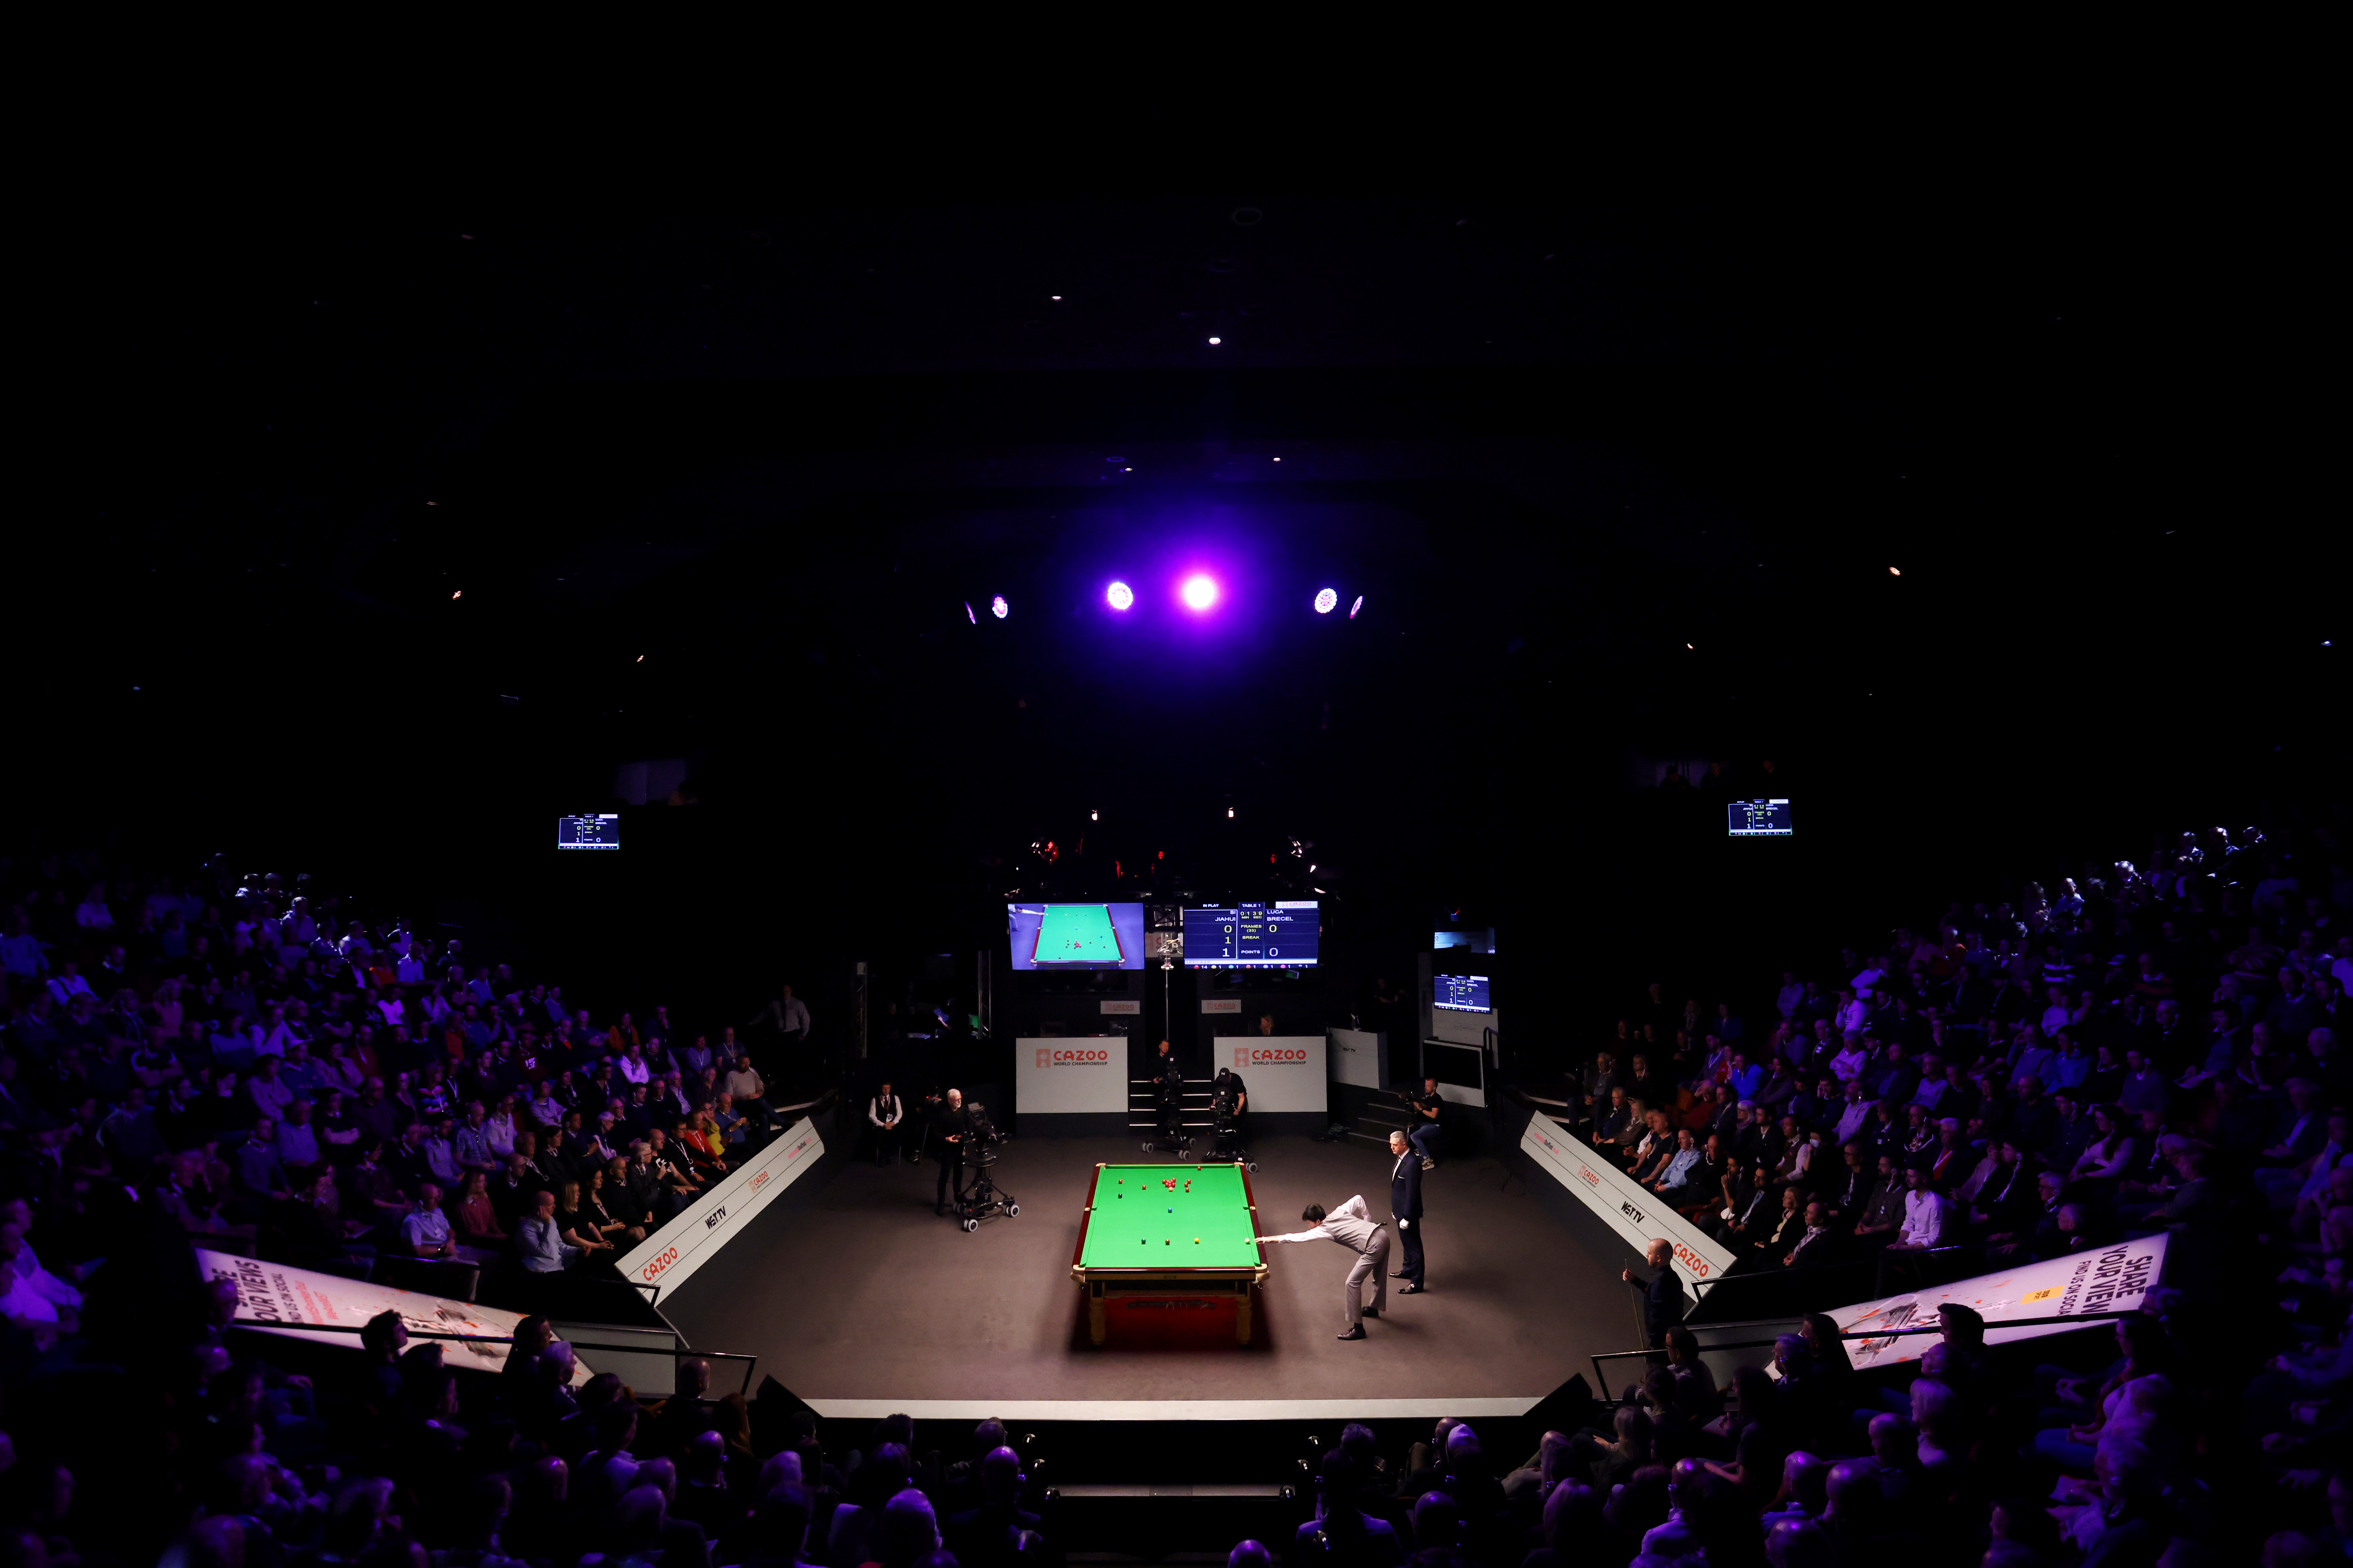 The Crucible's future as the home of snooker is uncertain